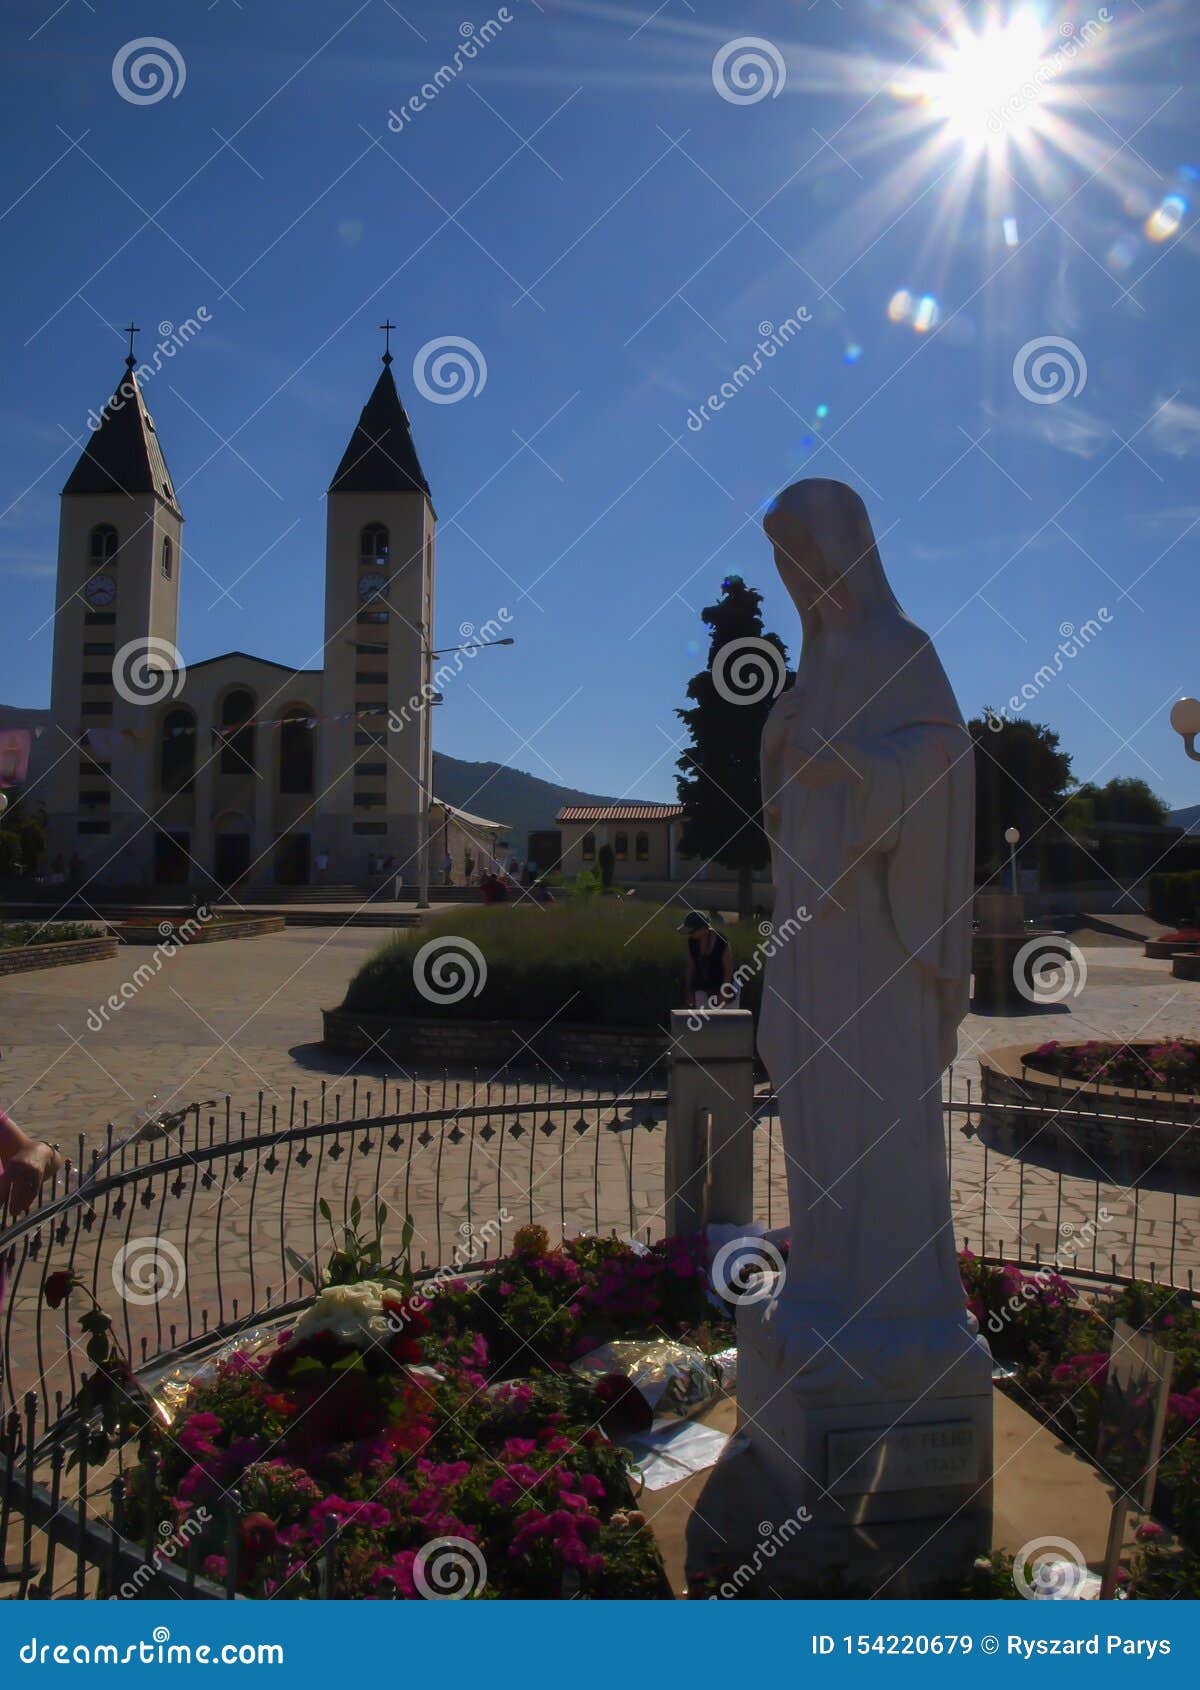 Church And Statue Of Madonna In Medjugorje A Place Of Pilgrimage From All Over The World Stock Image Image Of Medjugorje Faith